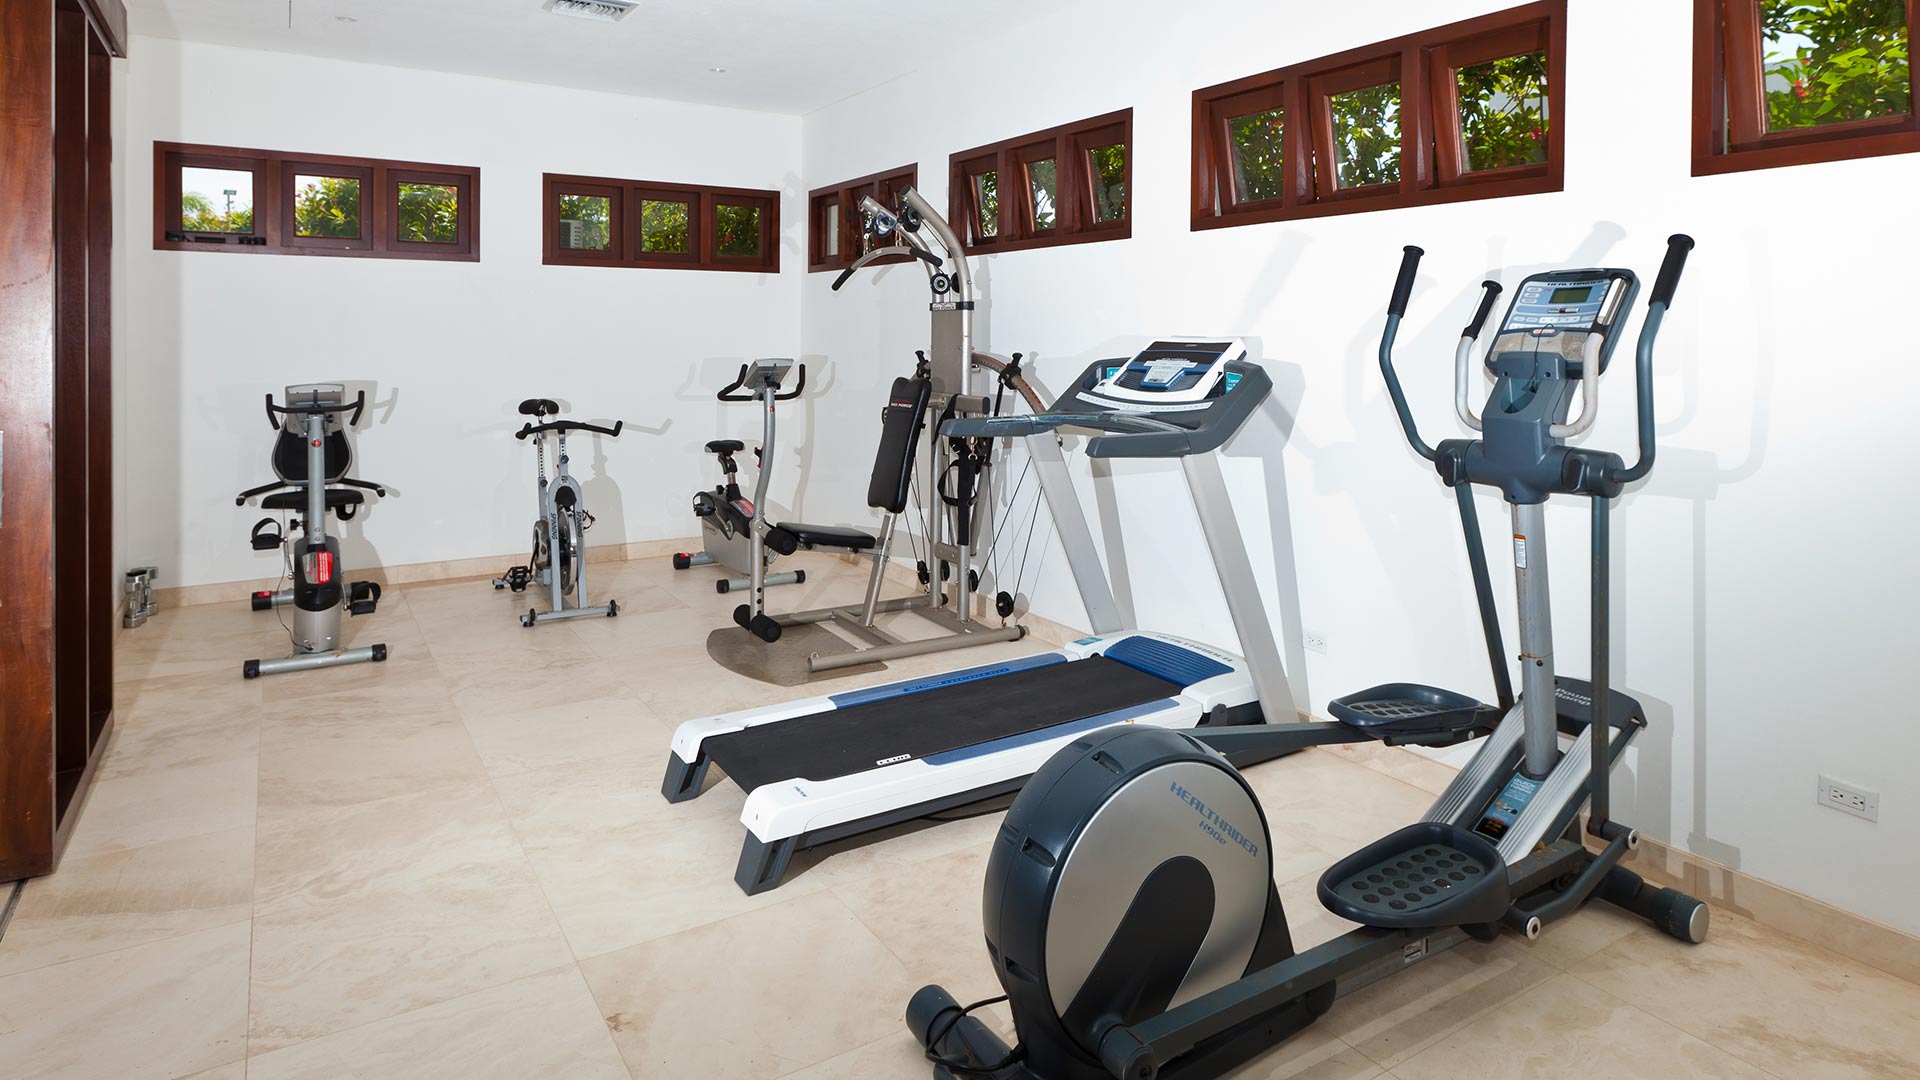 A private gym facility allows guests to keep up their exercise regime while enjoying a stay at Le Bleu Villa — and the stunning island of Anguilla